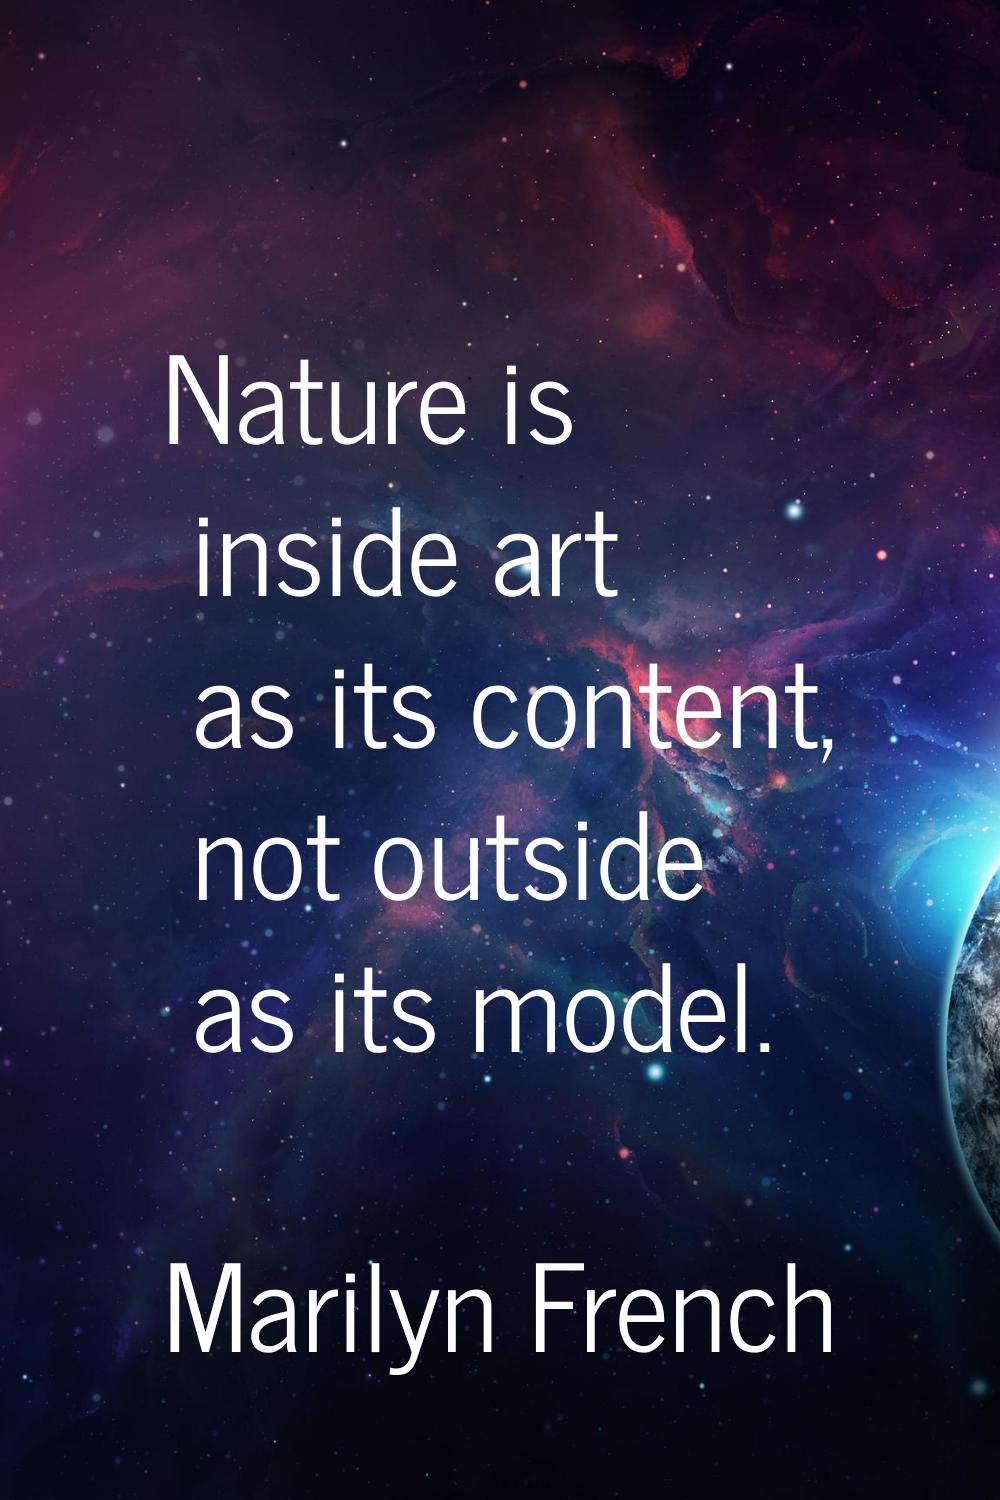 Nature is inside art as its content, not outside as its model.